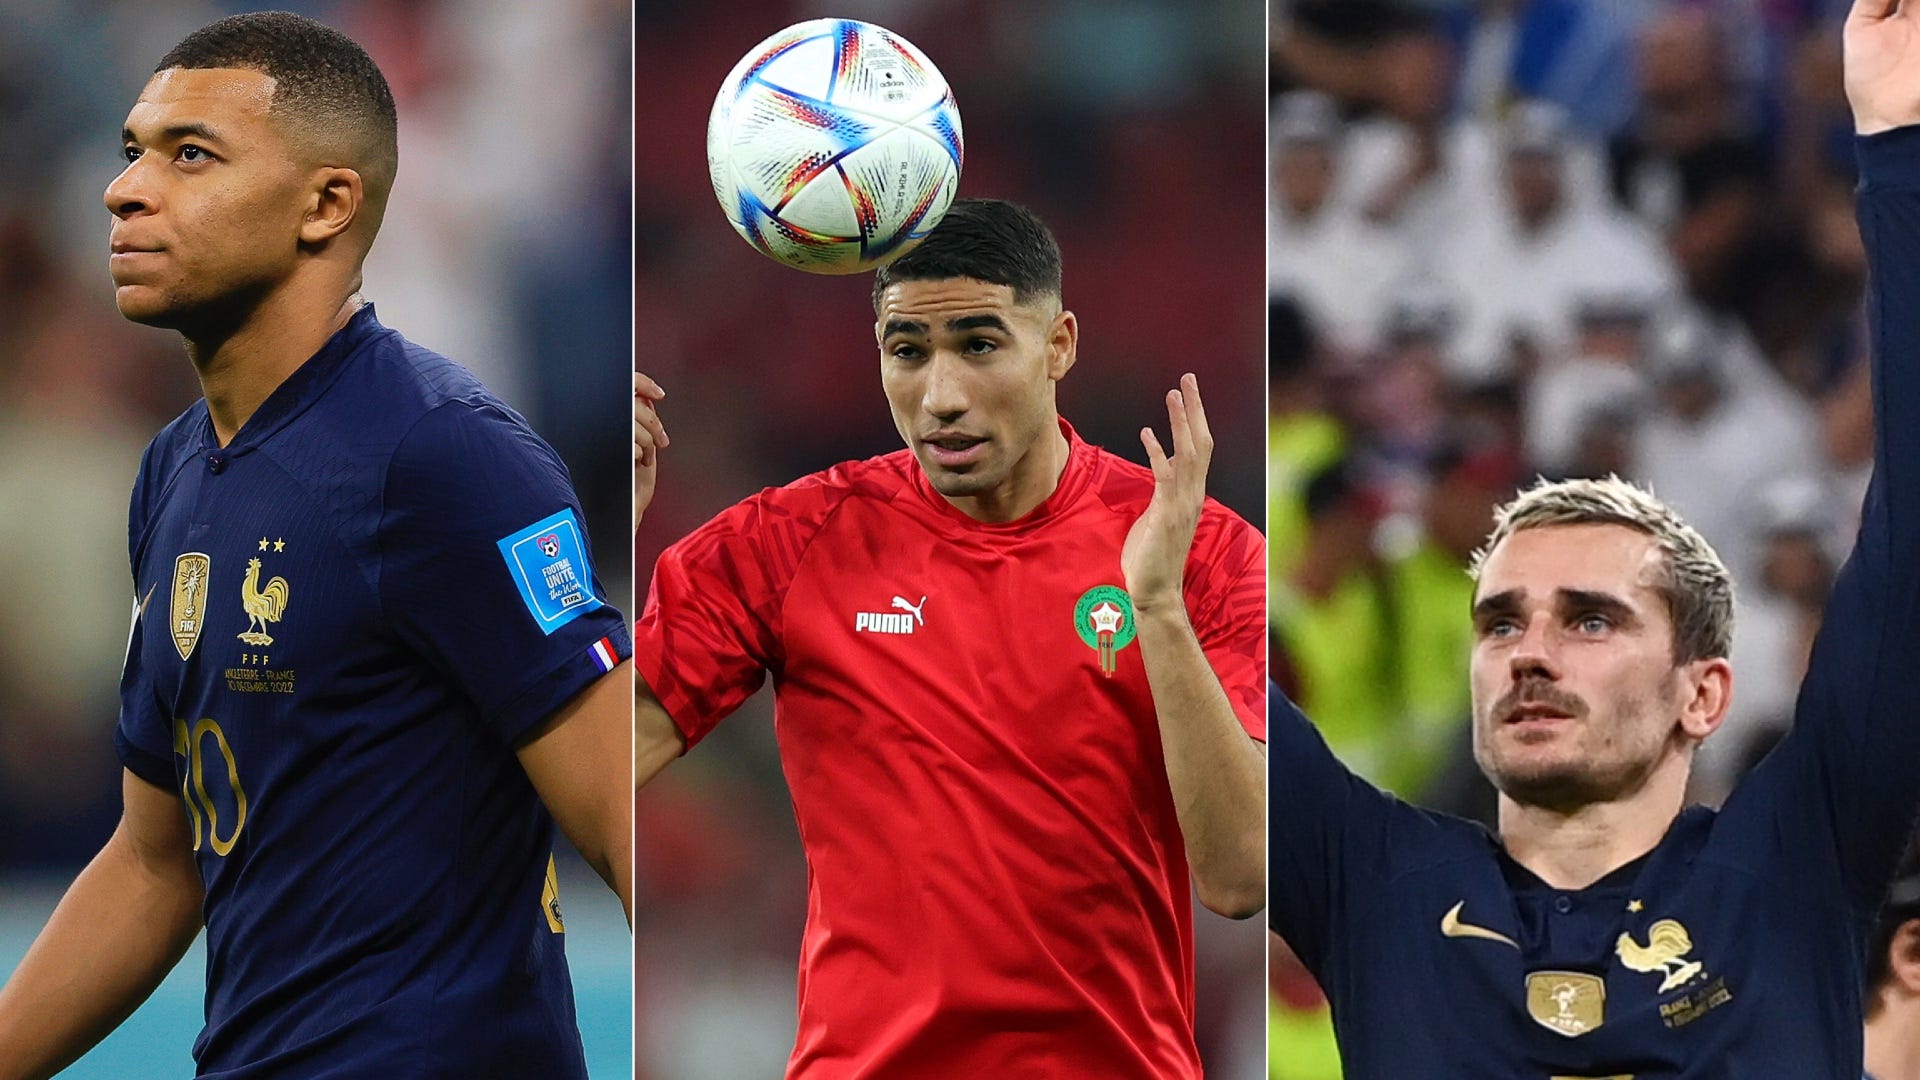 Mbappe, Hakimi, Griezmann - France, Morocco World Cup 2022